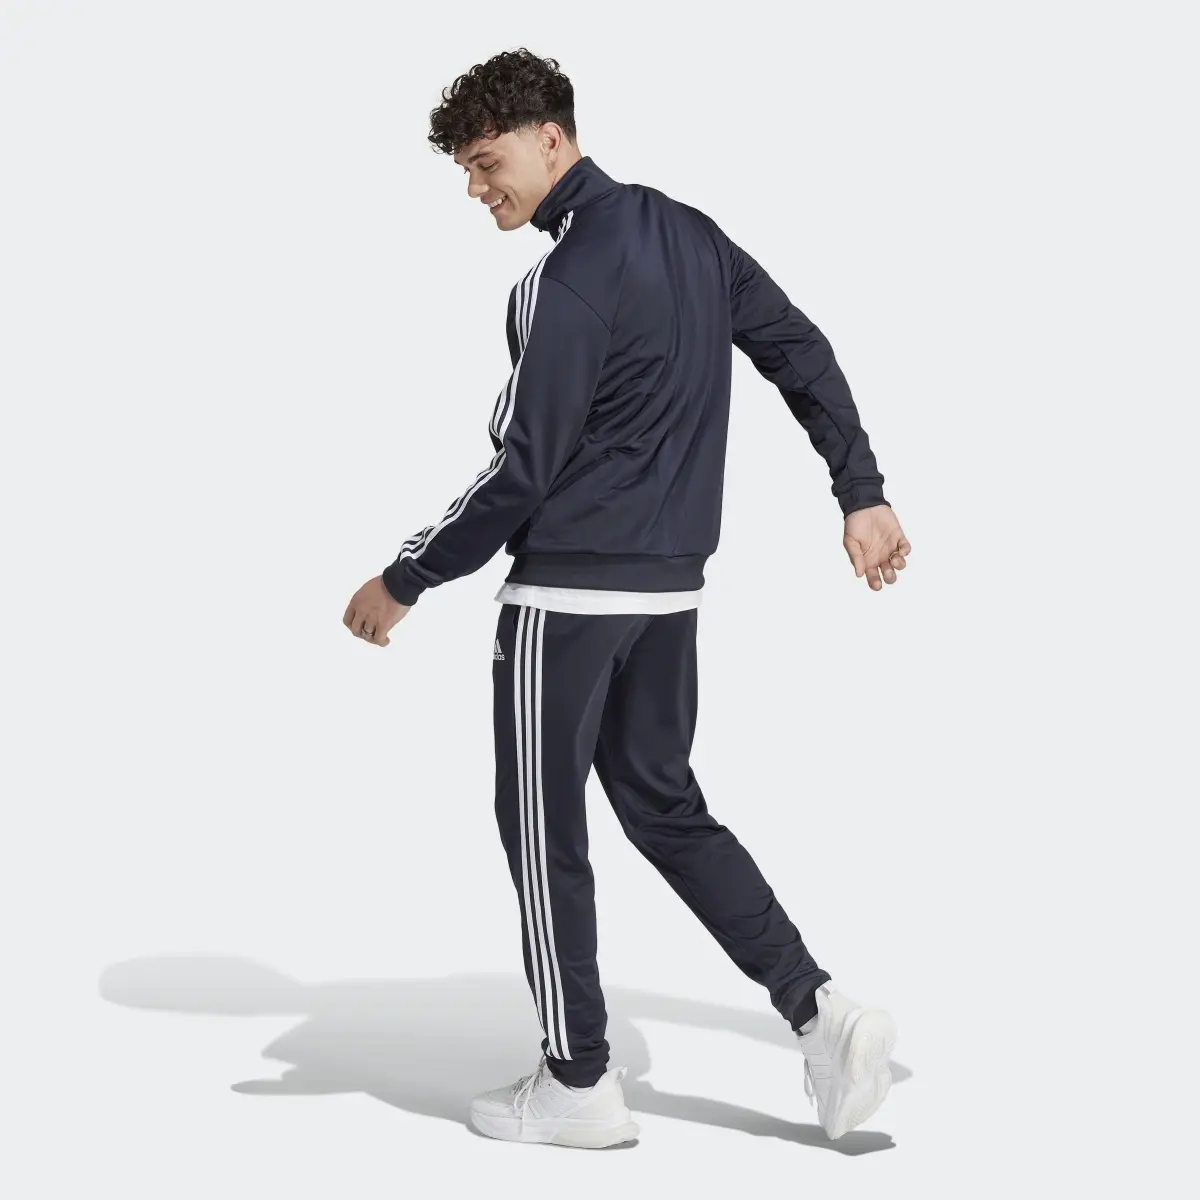 Adidas Basic 3-Stripes Tricot Track Suit. 3